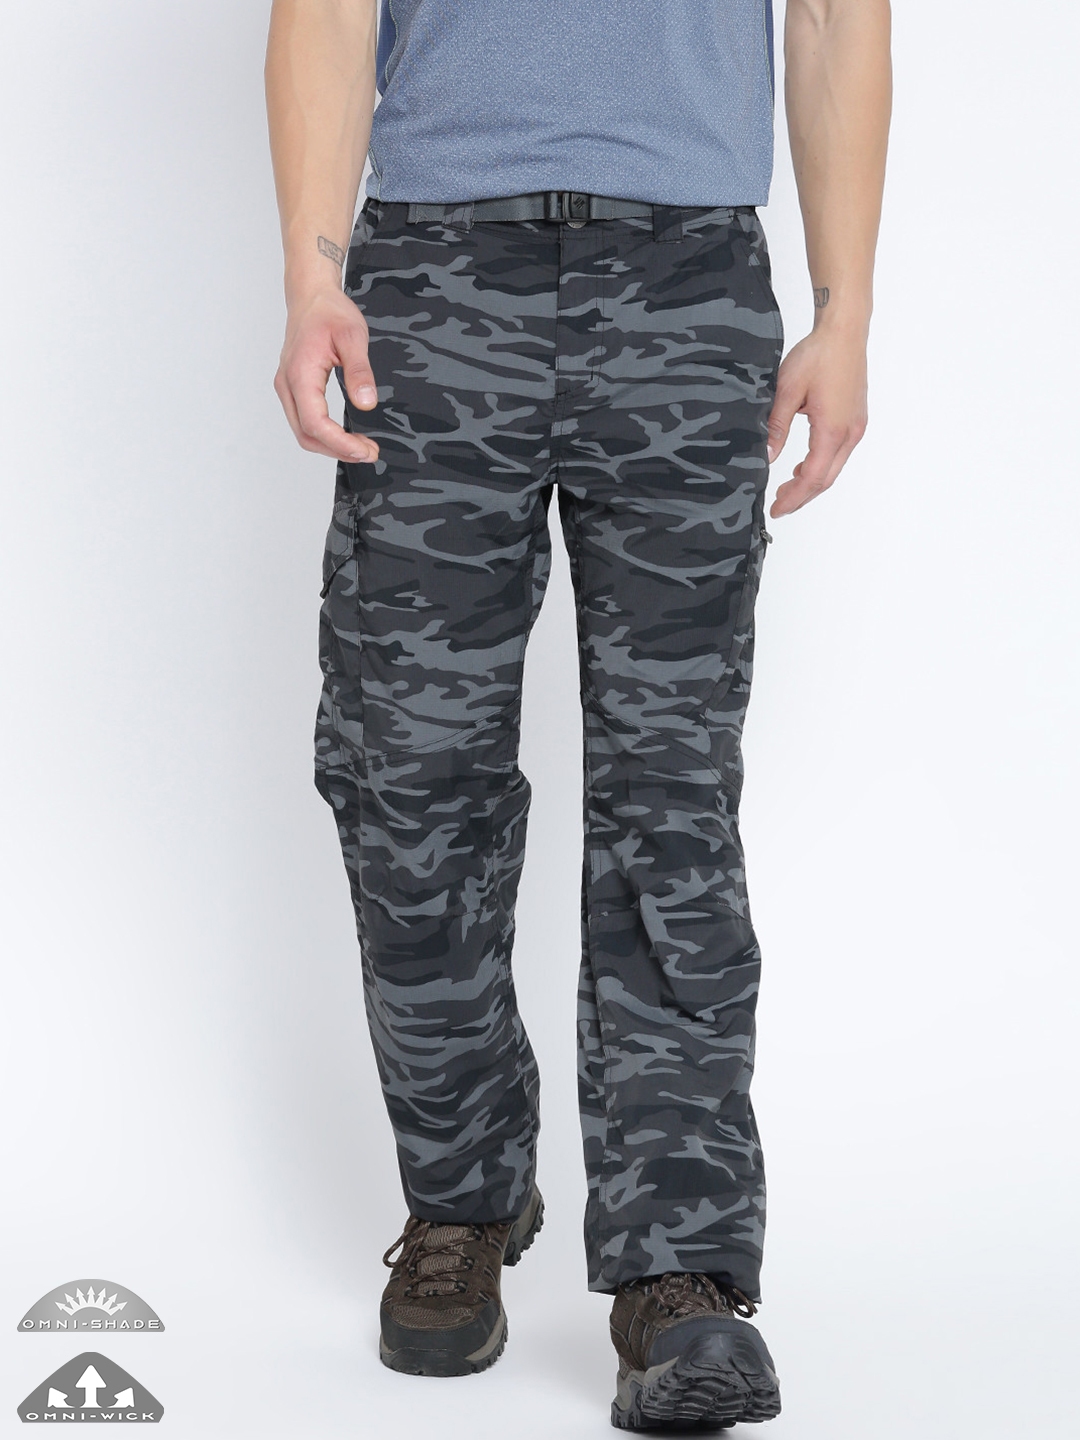 Buy The Indian Garage Co Printed Trousers online  32 products  FASHIOLAin